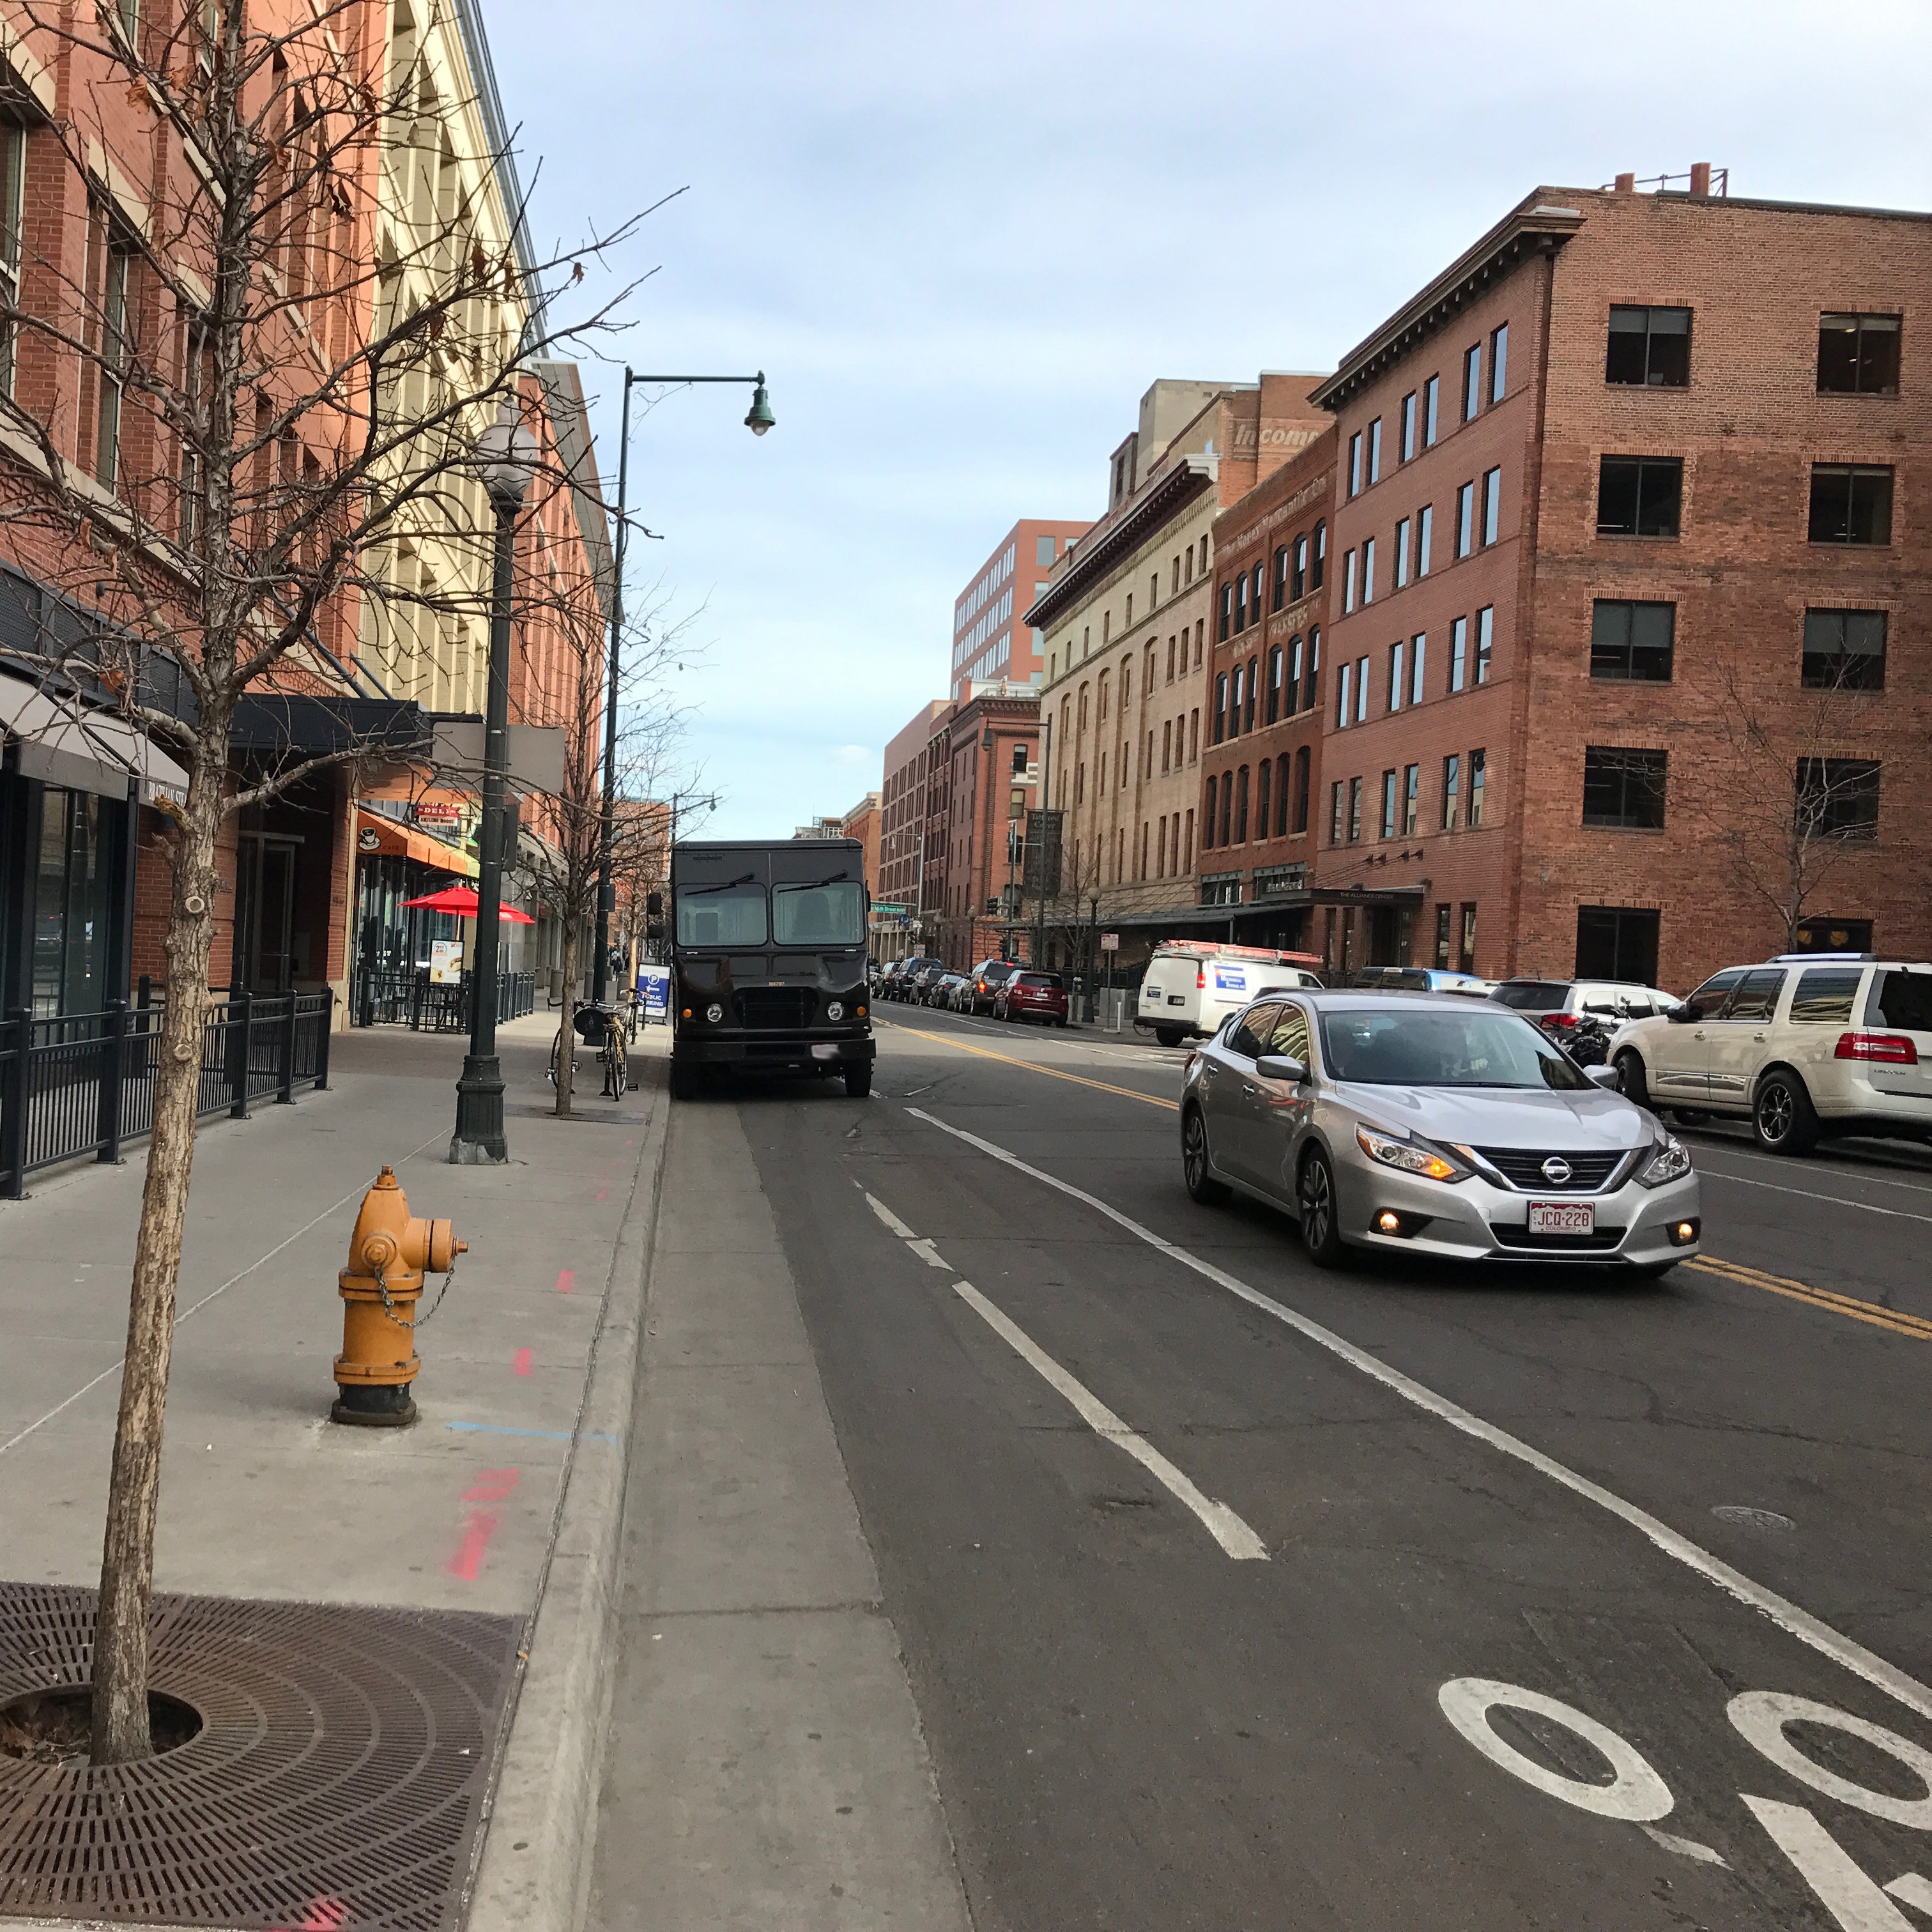 A UPS truck parked in a bike lane.